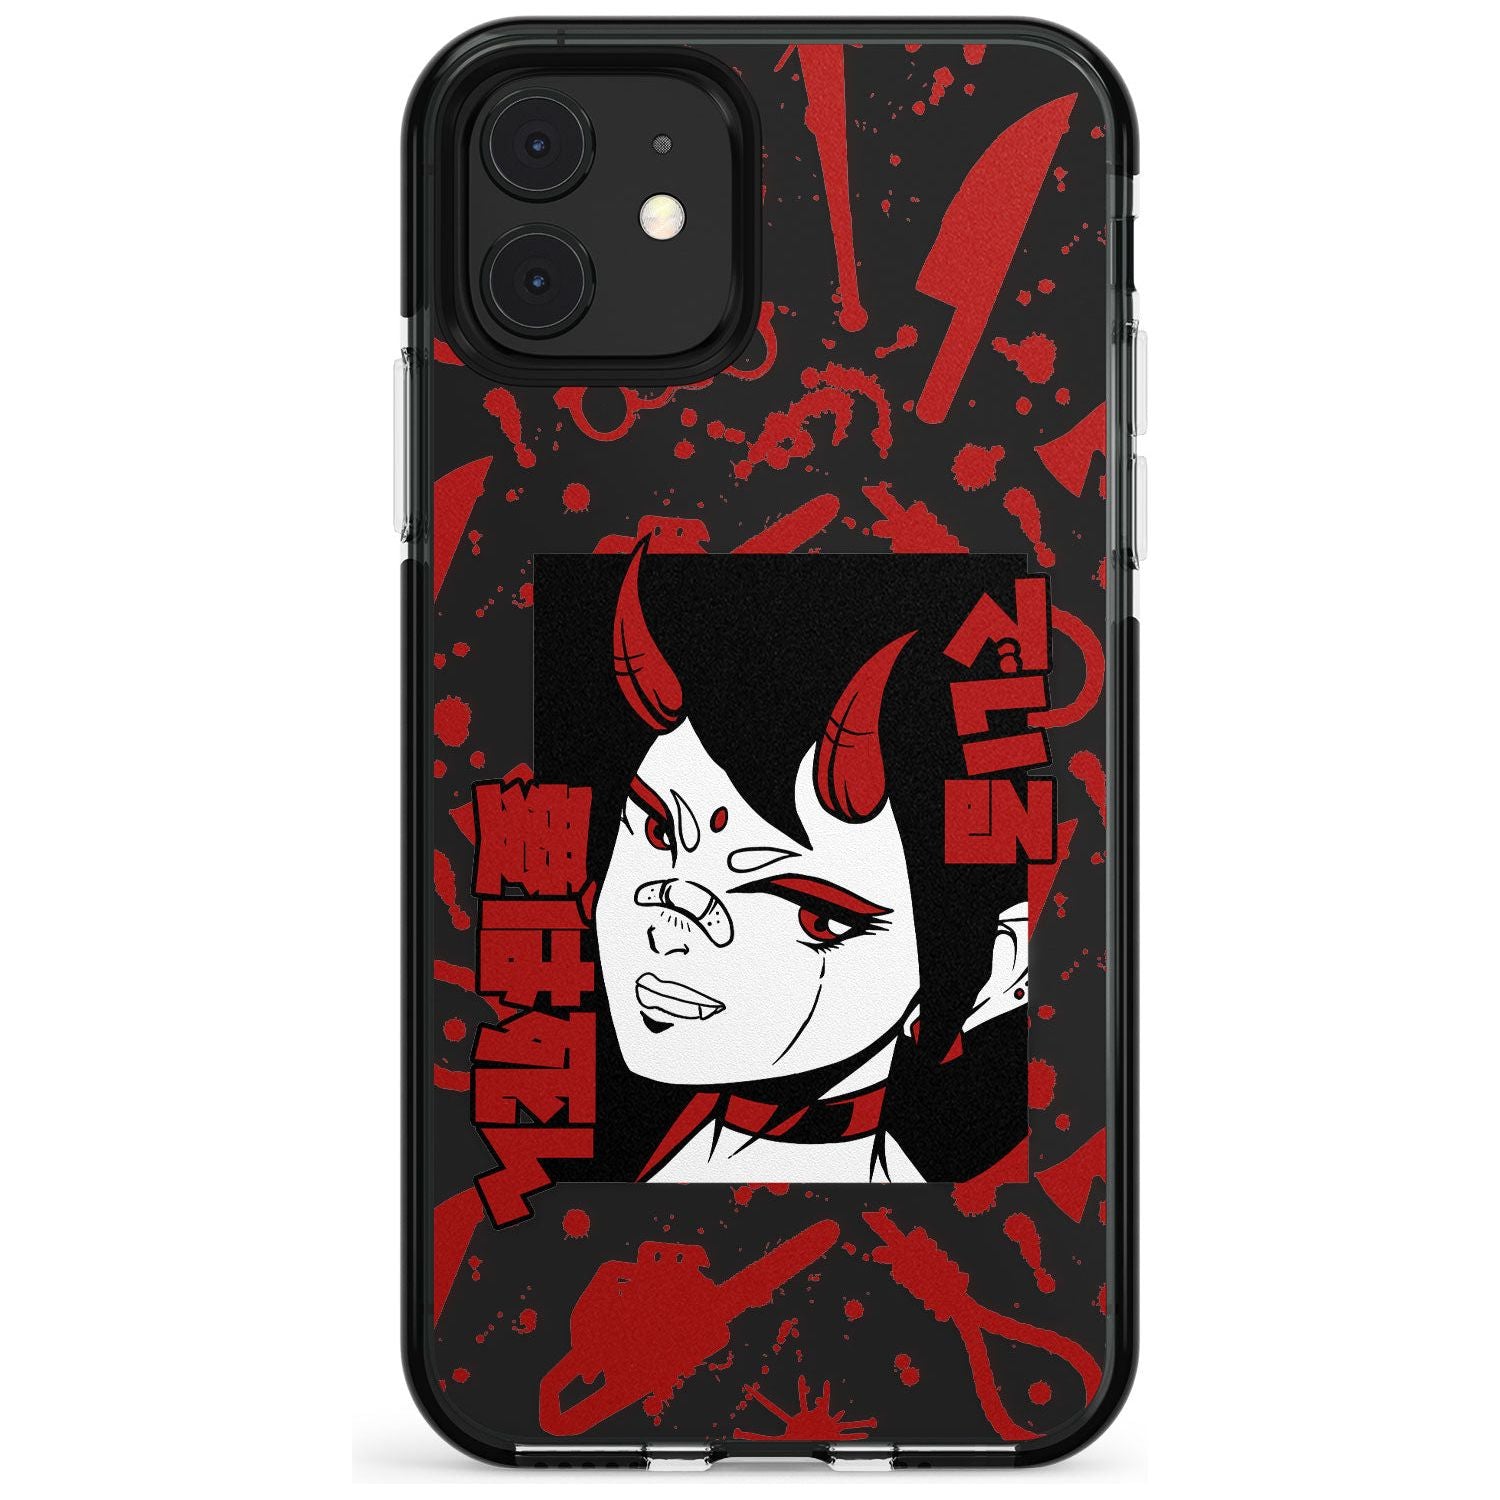 She's a Devil Black Impact Phone Case for iPhone 11 Pro Max